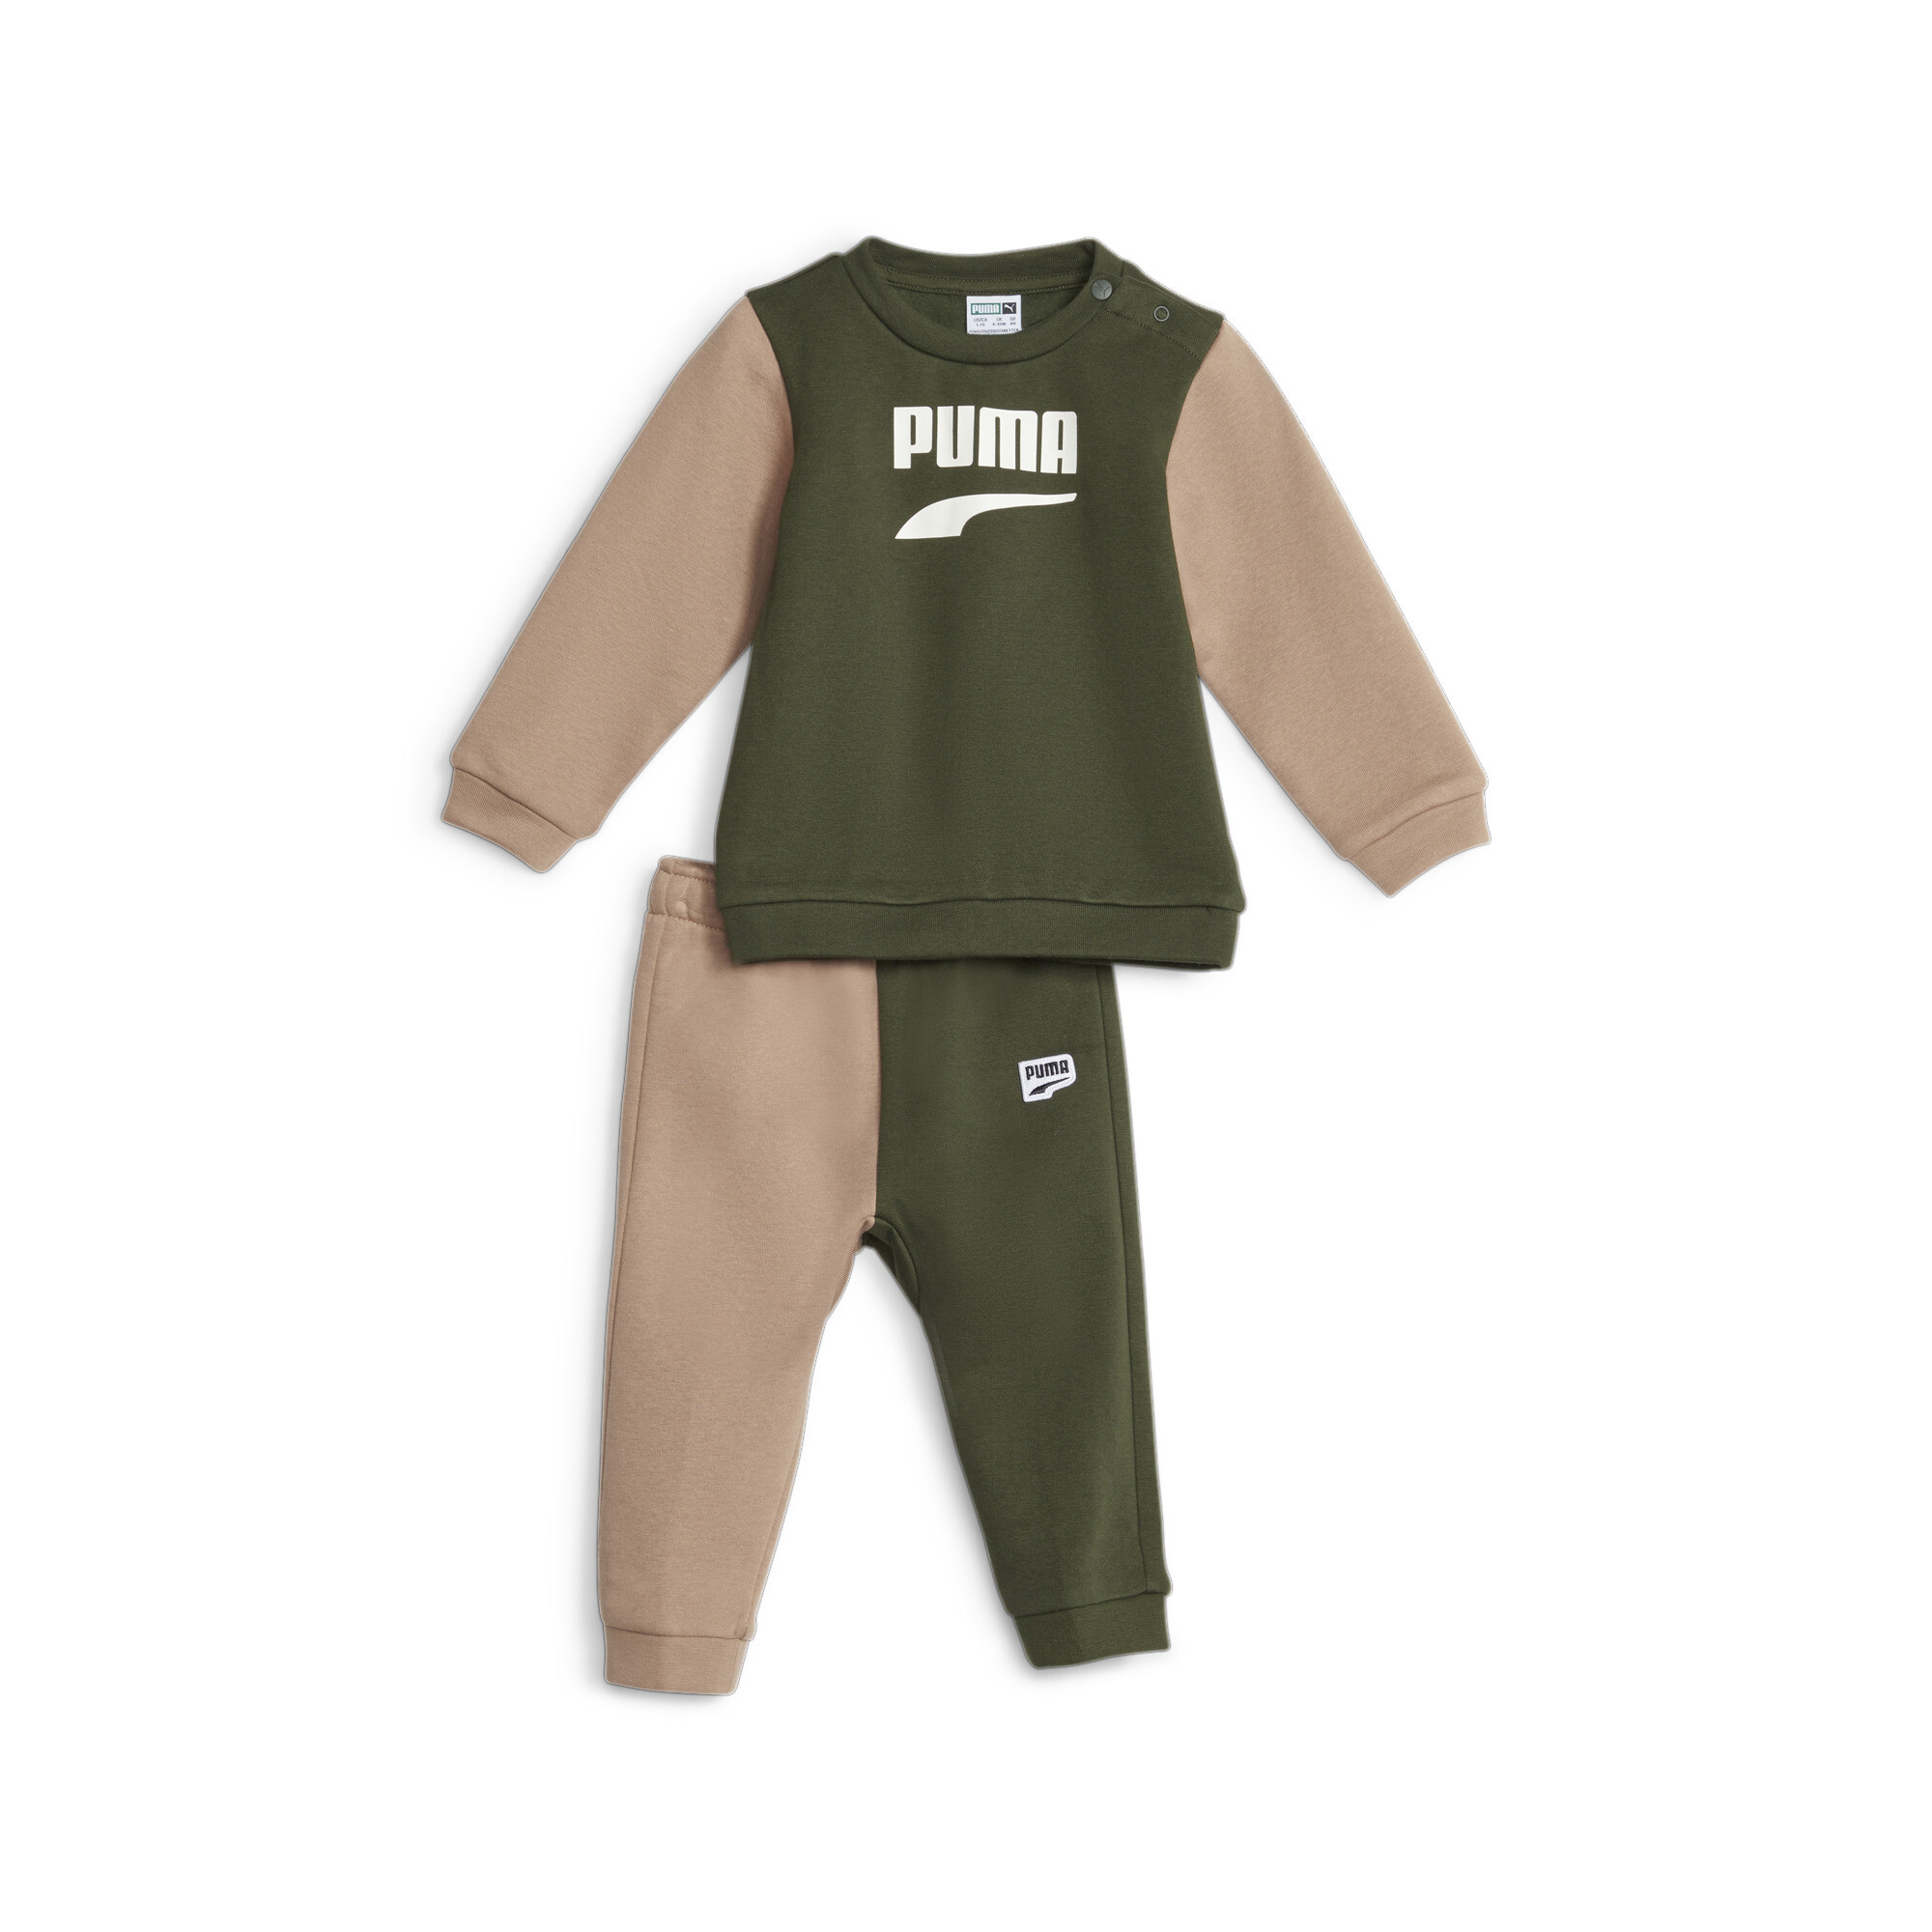 Puma Minicats Downtown Toddlers' Set, Green, Size 6-9M, Clothing